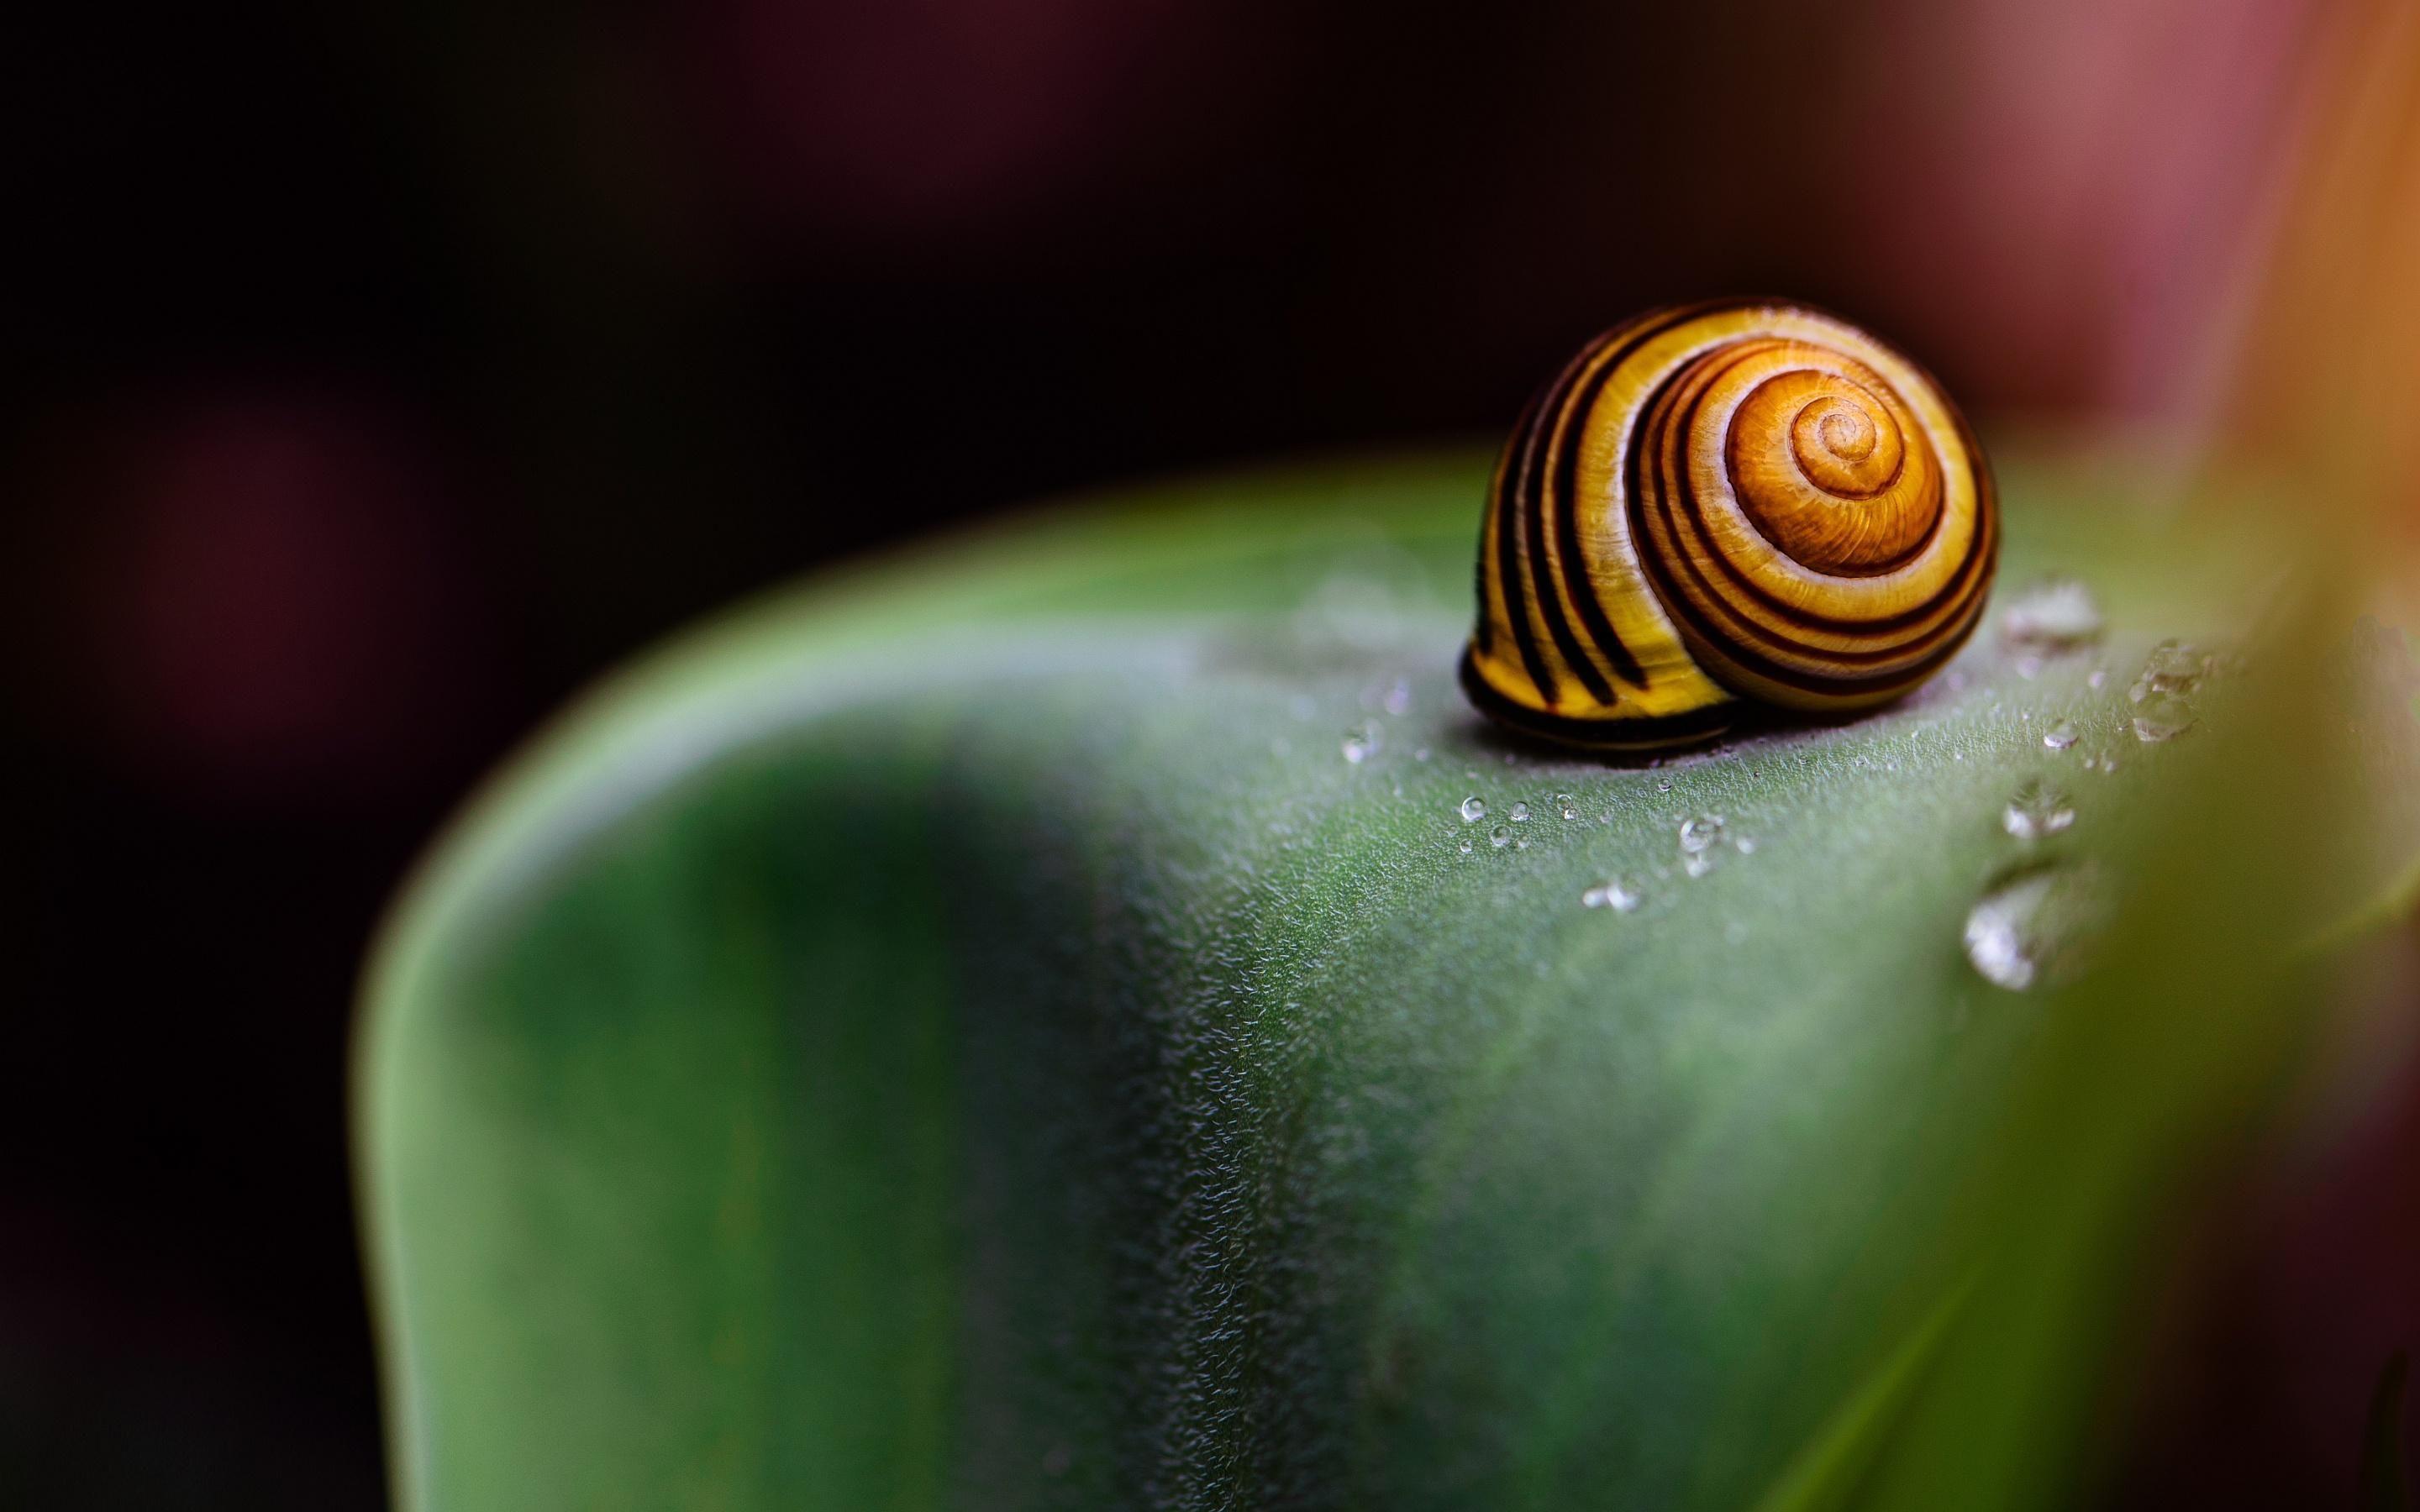 Snail Wallpaper, PC, Lap Snail Background In FHD DQY FN.NG